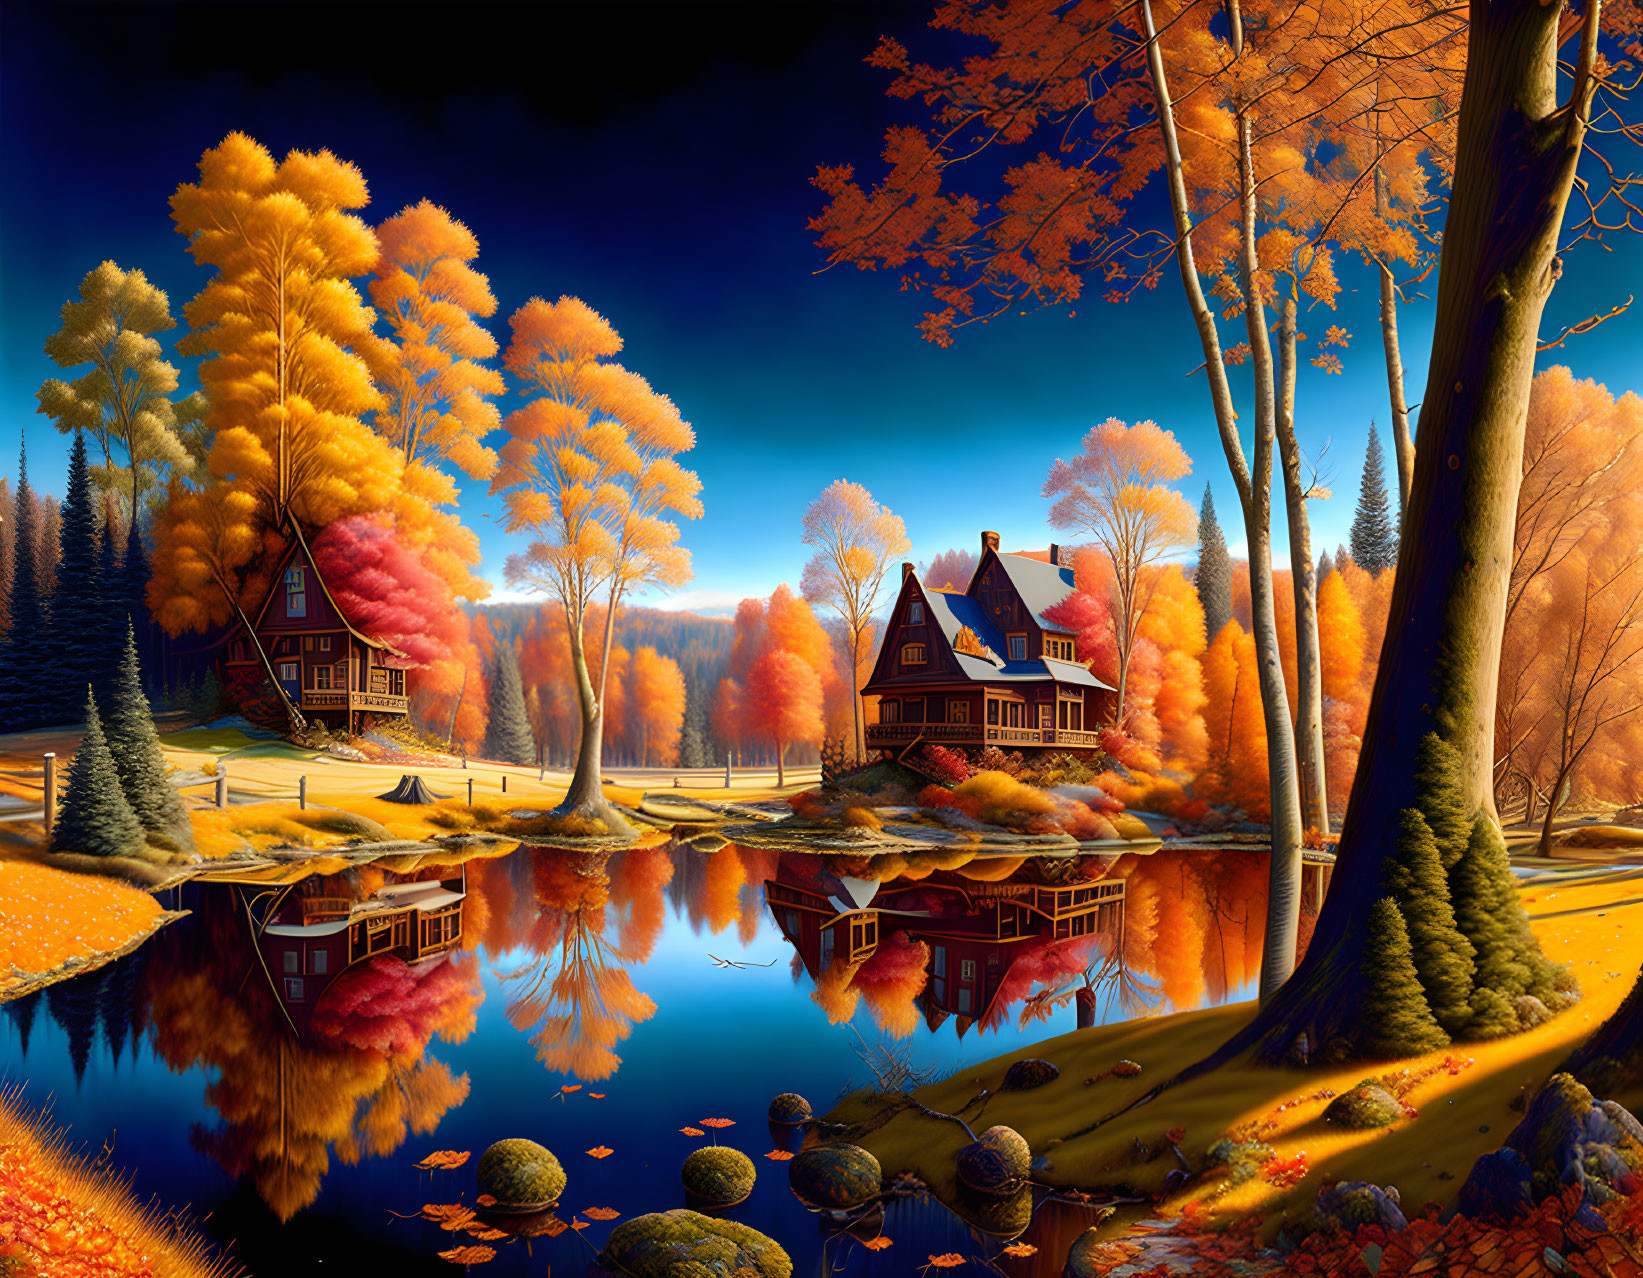 A Hyperrealistic and Intricate Autumn Landscape